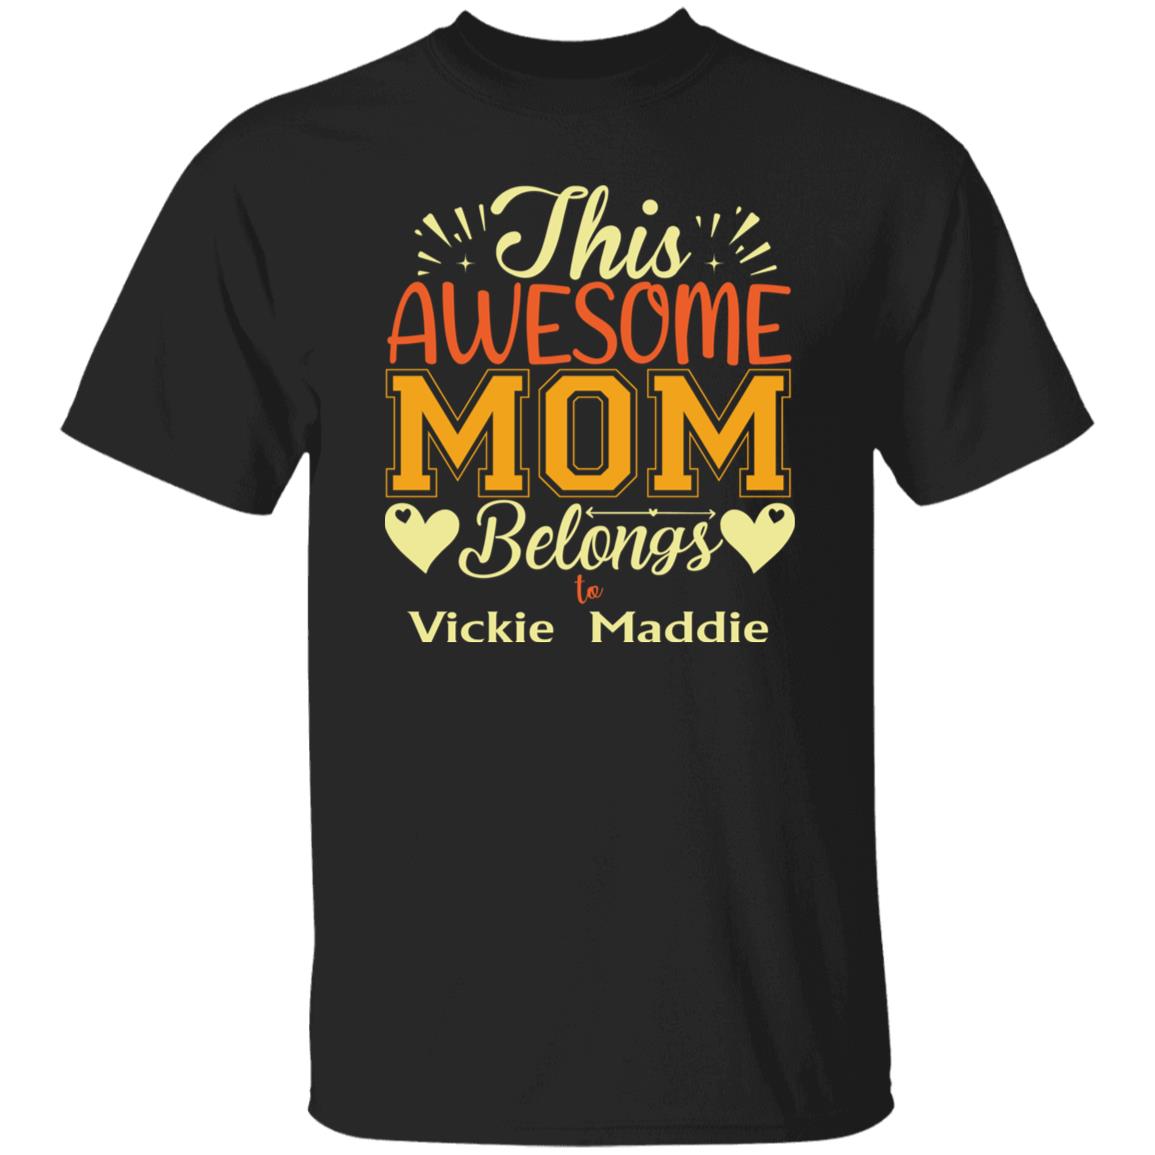 This Awesome Mom Belongs to - Personalized T Shirt For Mom